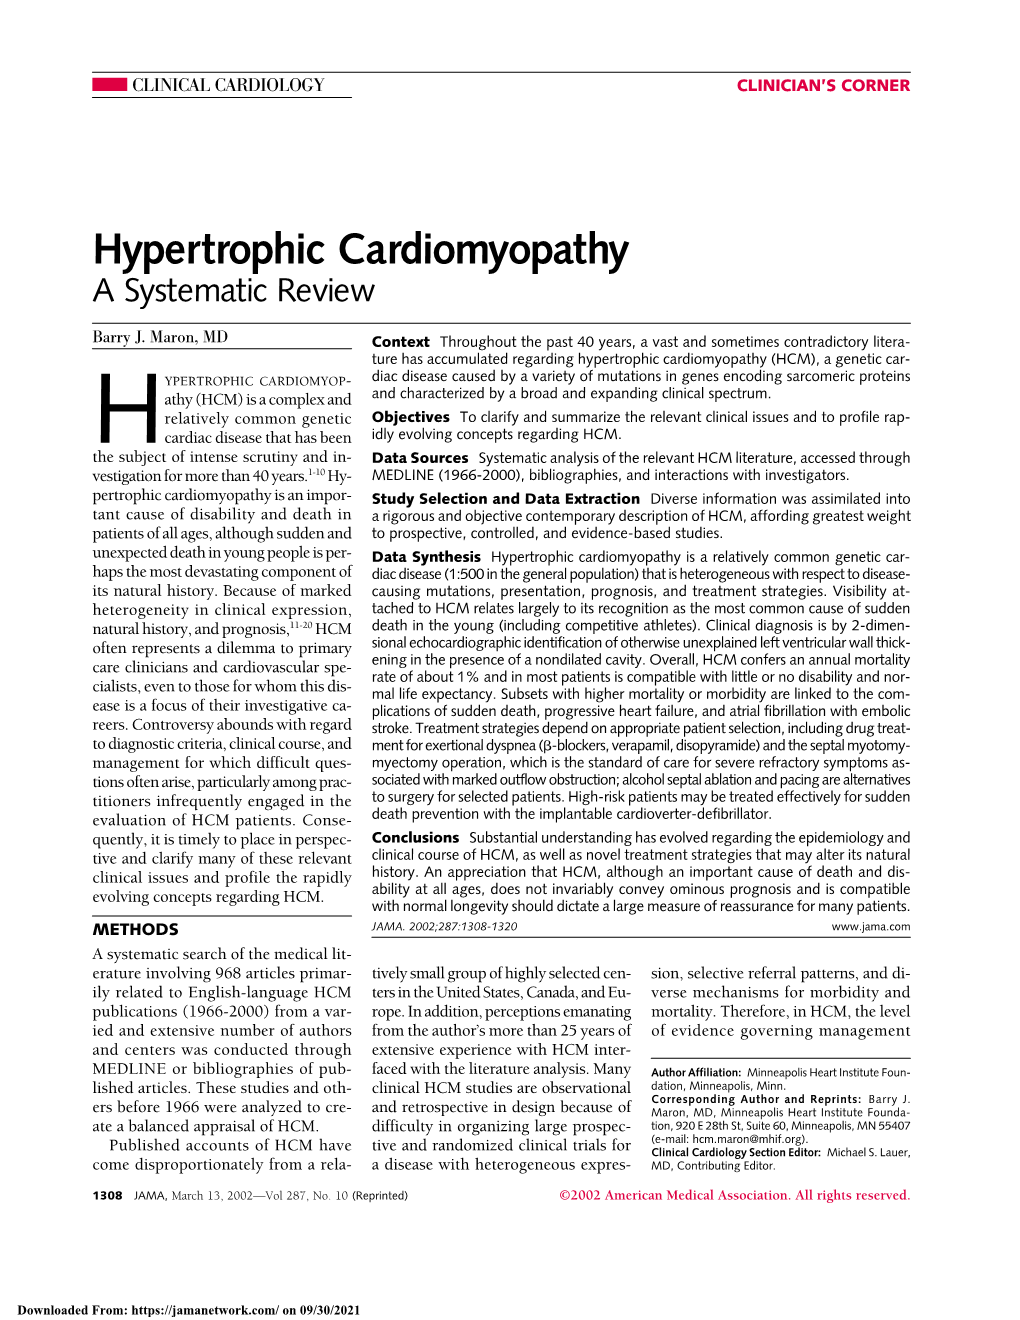 Hypertrophic Cardiomyopathy: a Systematic Review